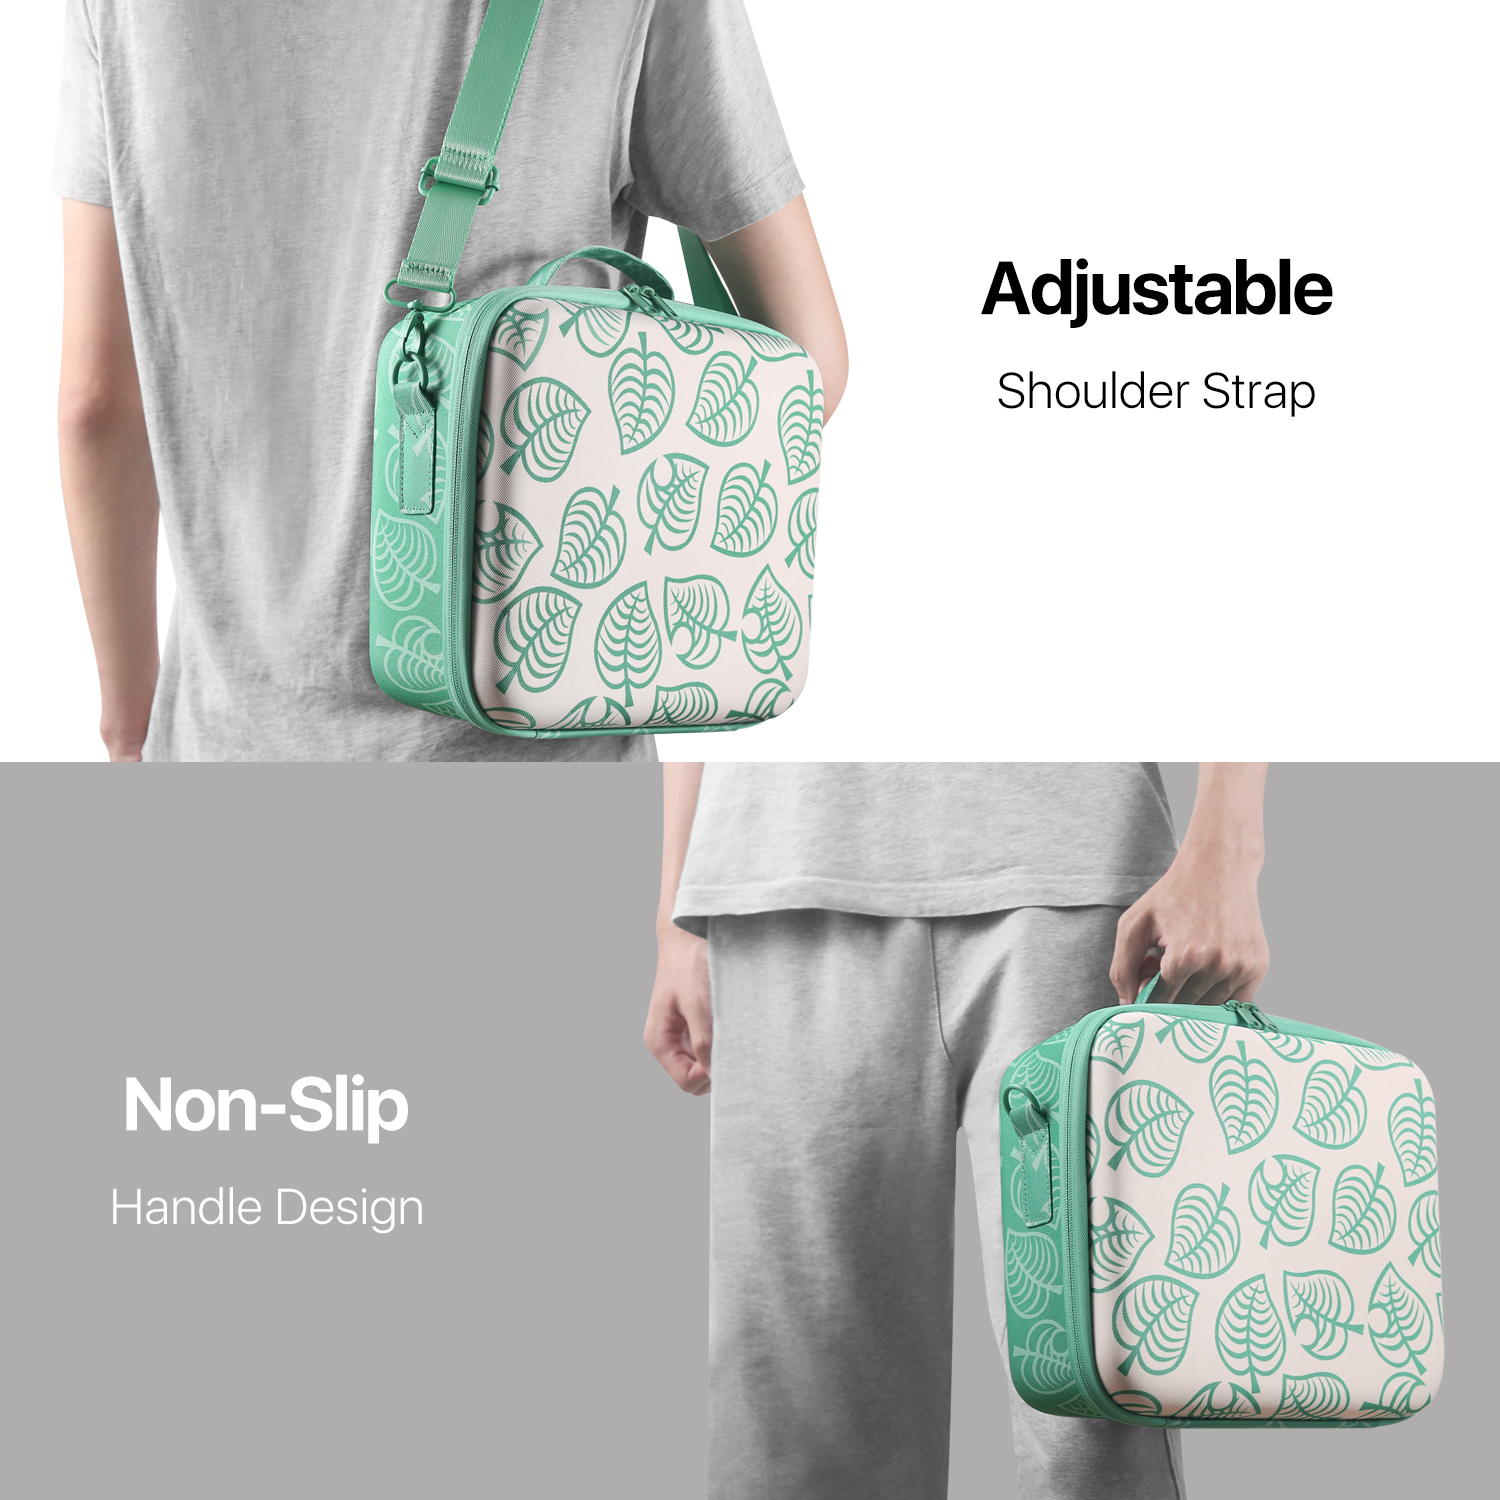 Portable and Travel Friendly - Cushioned handle provides a firm grip and comfortable carry; Smooth zipper and accented zipper pull makes accessing your device quick and fast; Detachable adjustable shoulder straps